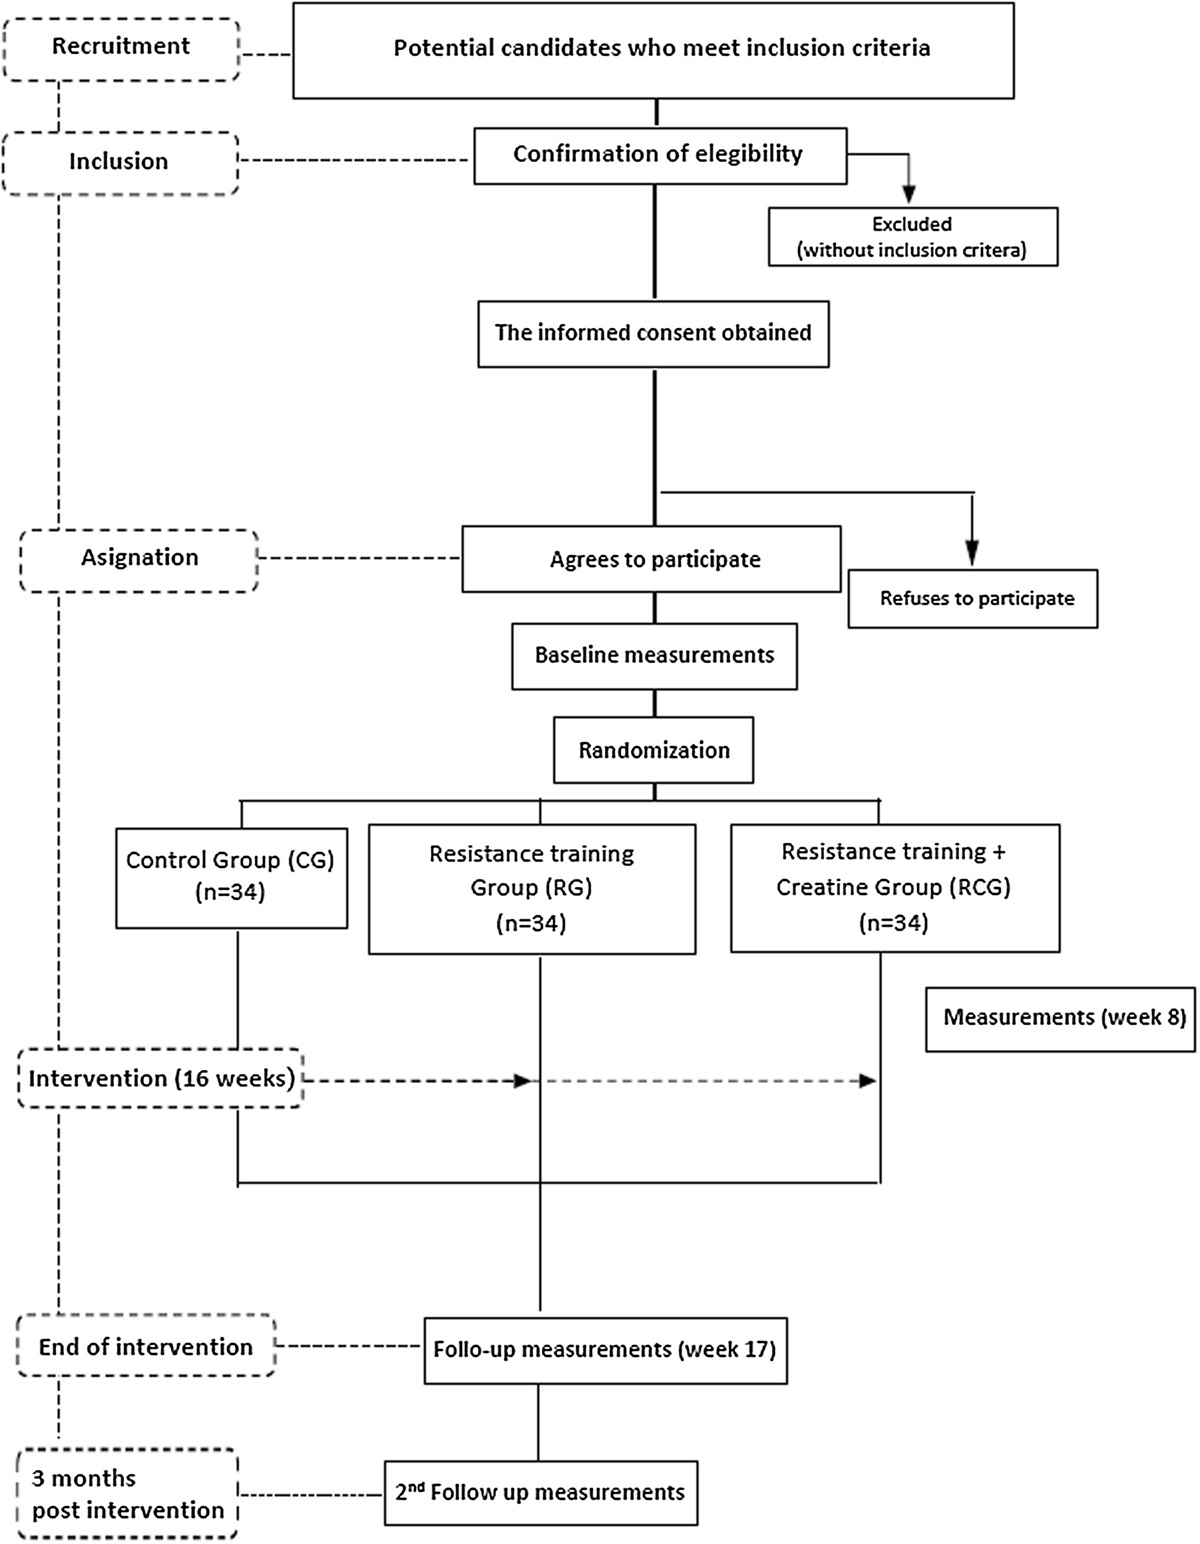 Creatine Supplementation and Resistance Training in Patients With Breast Cancer (CaRTiC Study): Protocol for a Randomized Controlled Trial